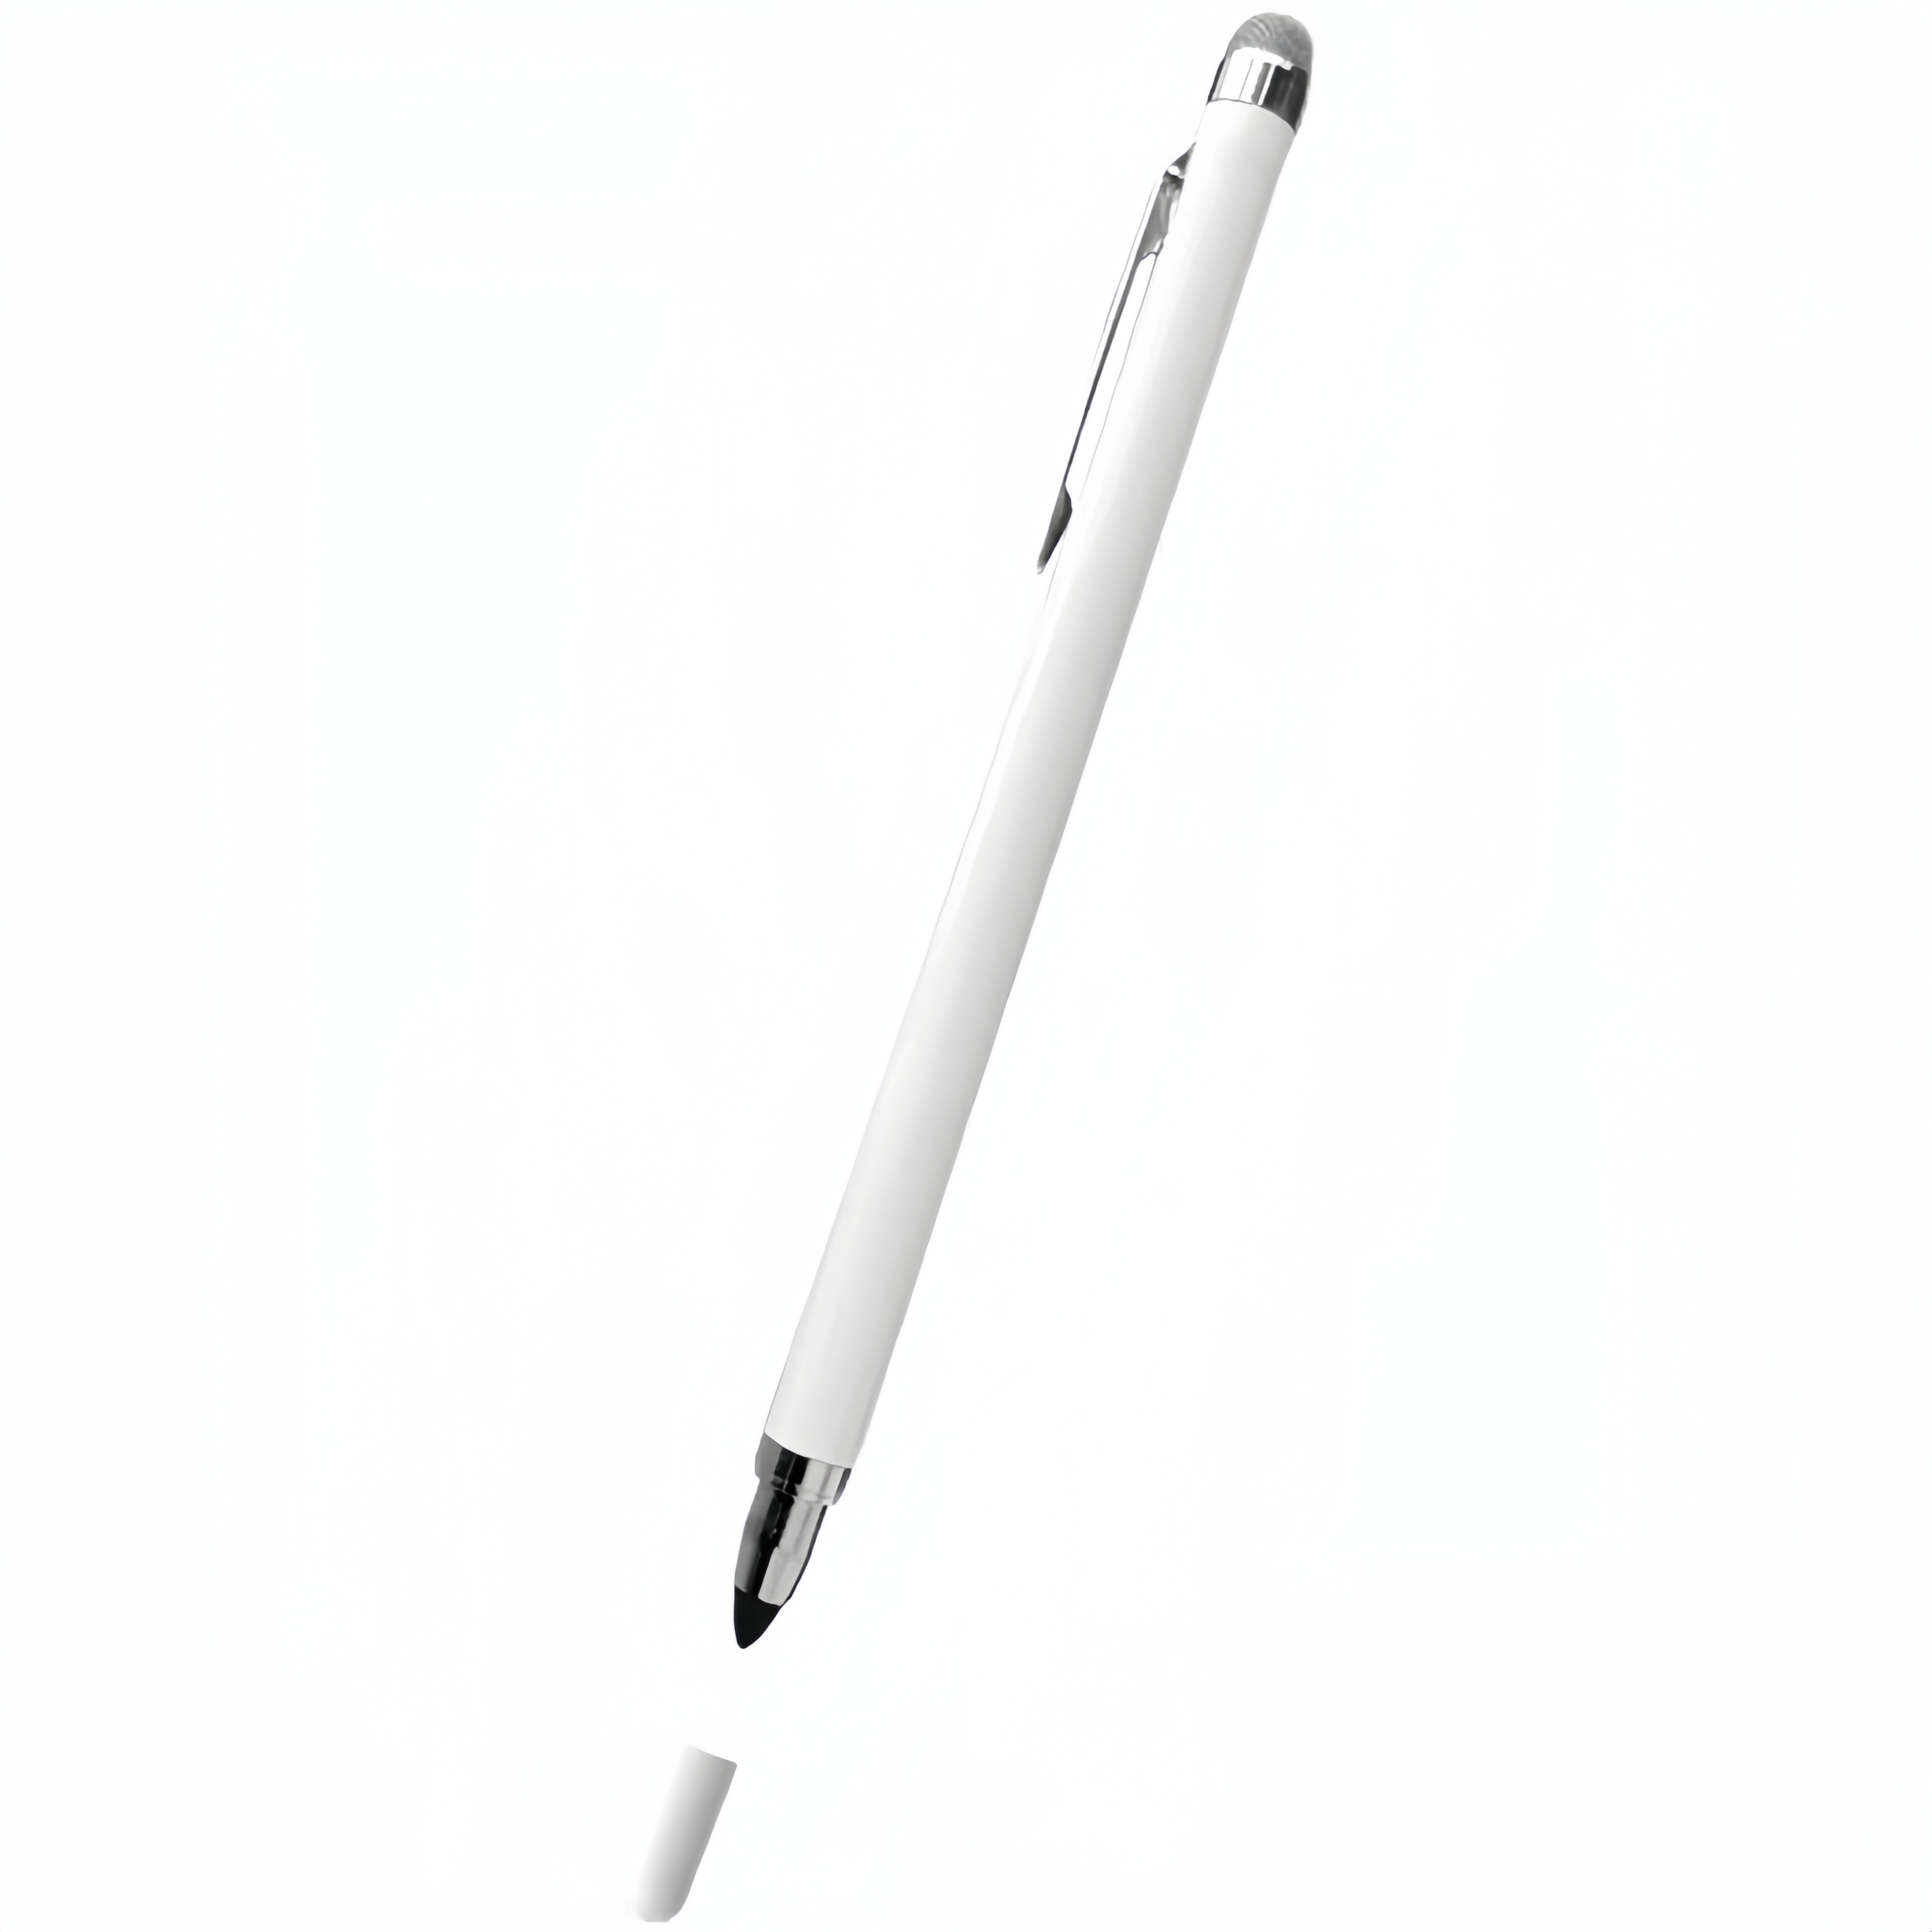 Stylus Pen for Touch Screens, Disc Tip & Magnet Cap Styli Pencil Compatible  with Apple iPad pro/iPad 6/7/8/9/iPhone/Samsung Galaxy Tab A7/S7/Fire HD